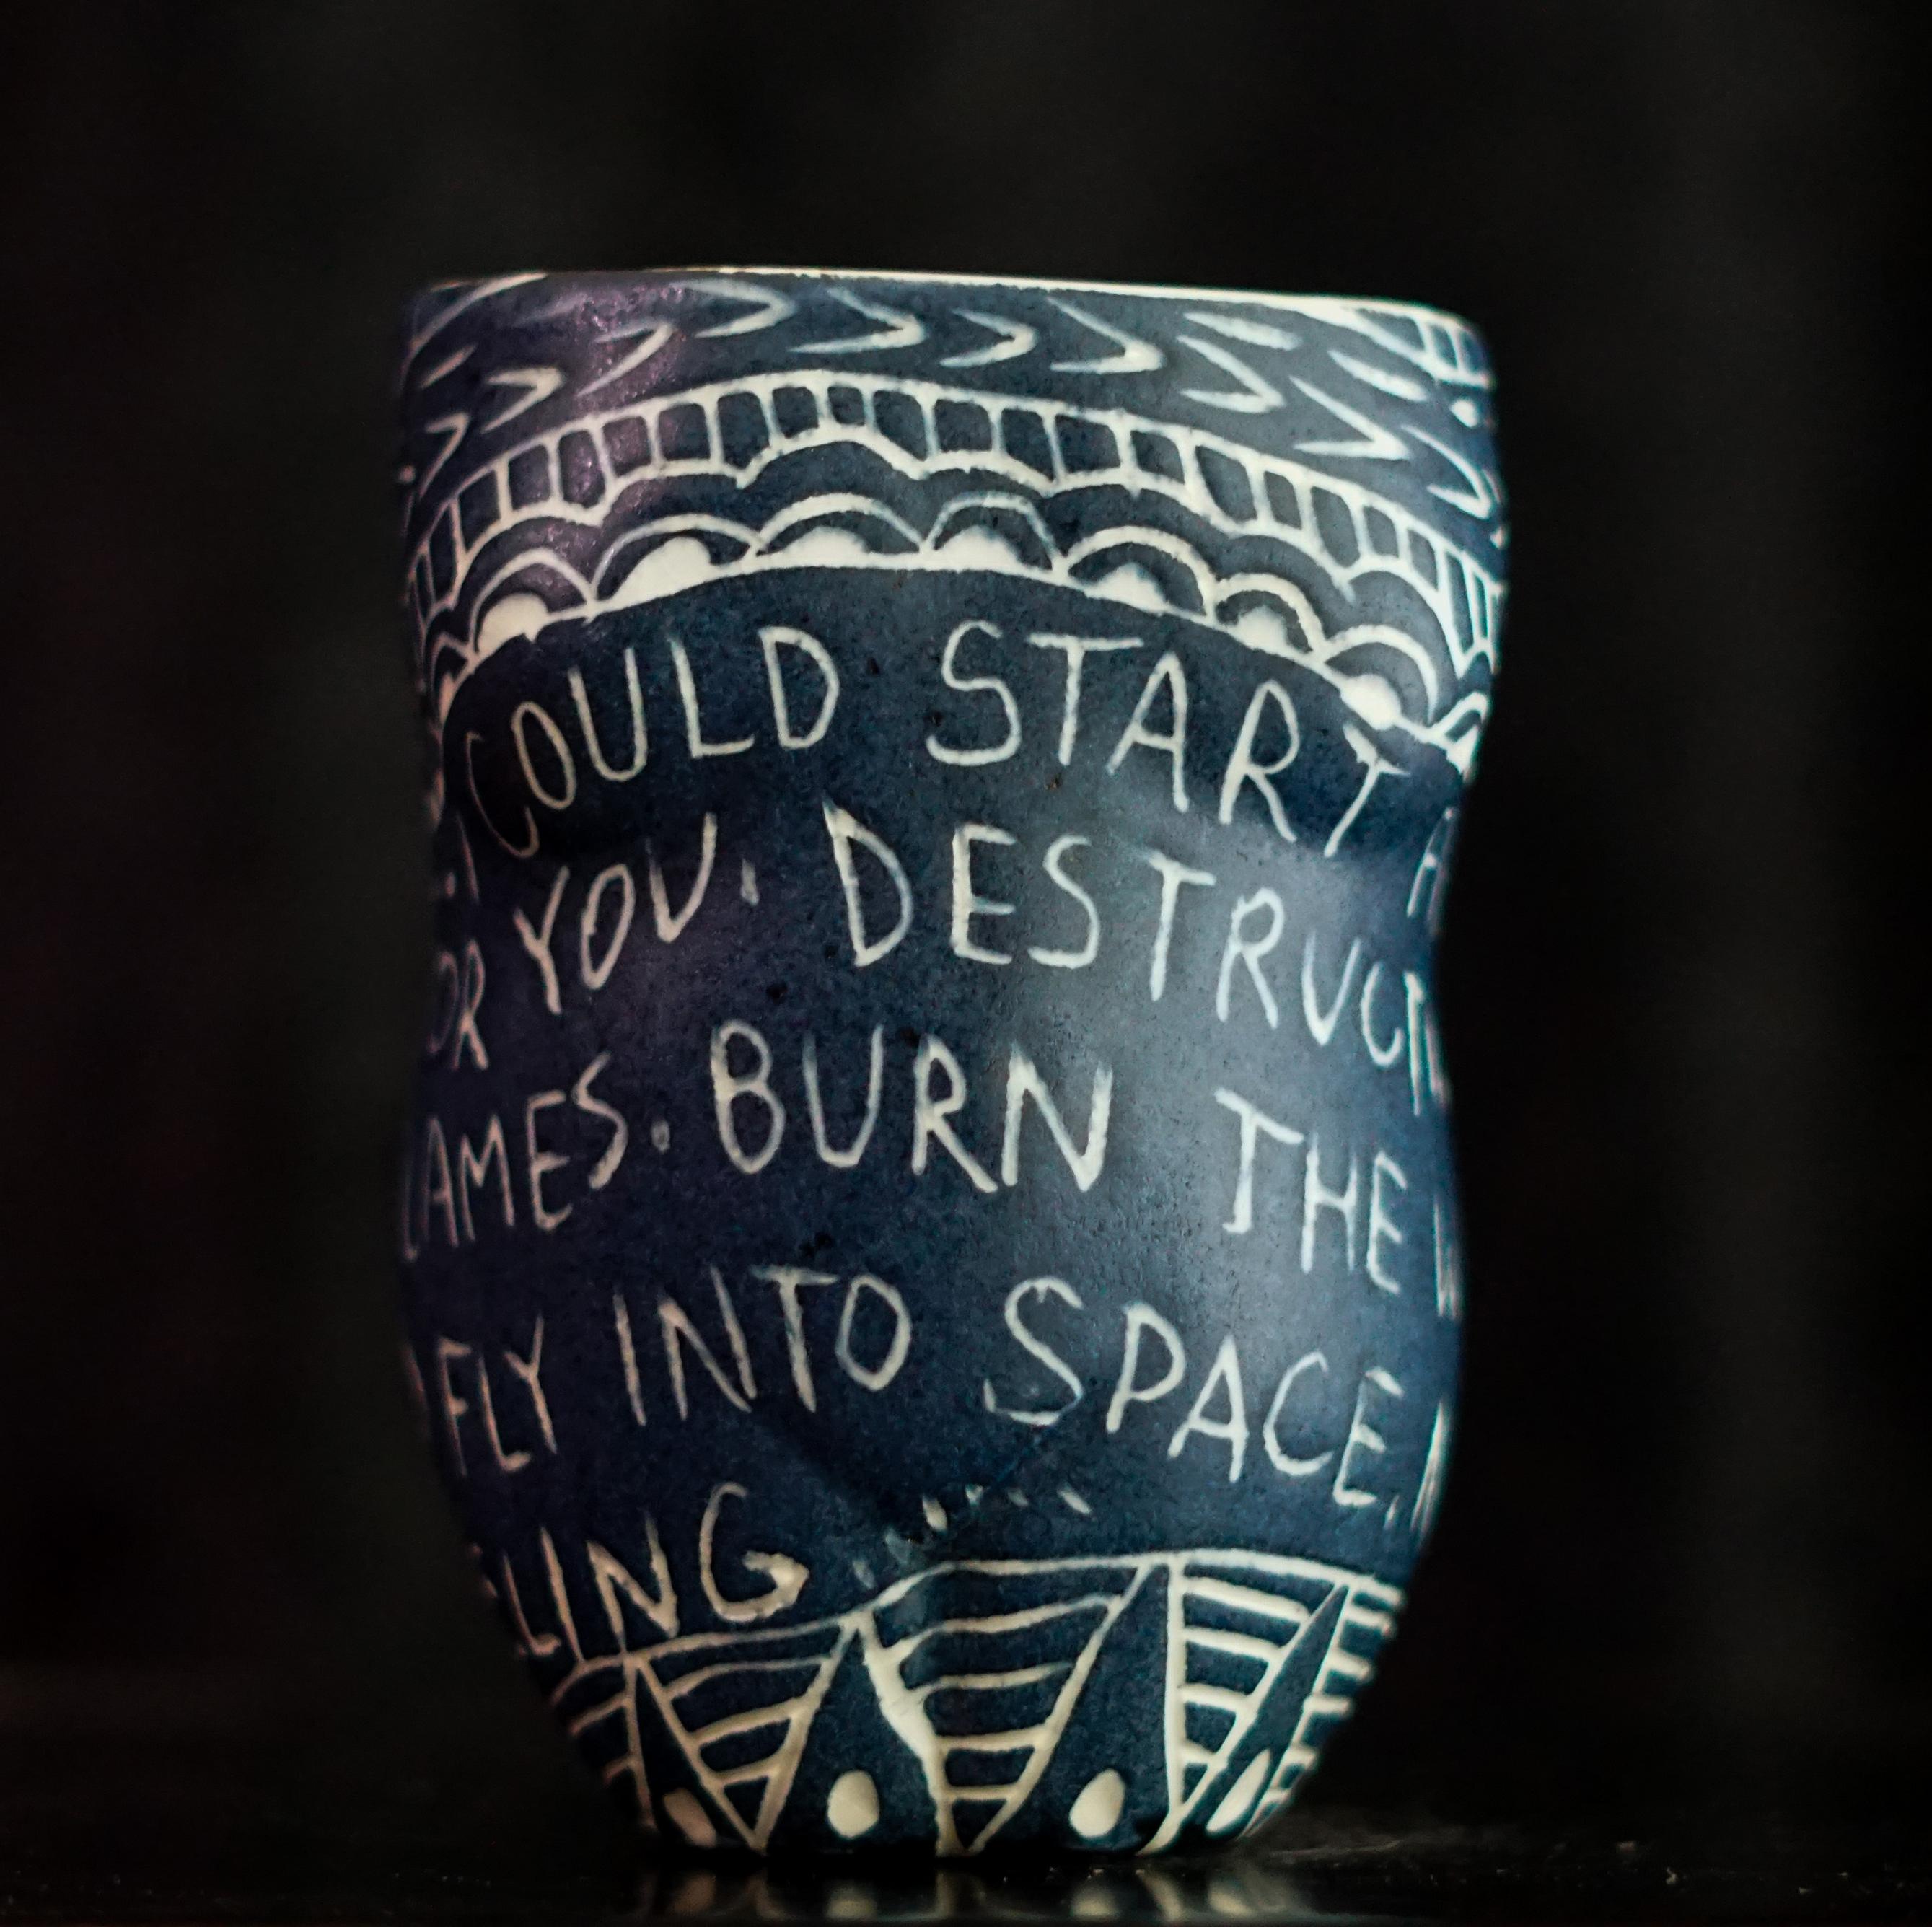 Alex Hodge Abstract Sculpture - “I Could Start Fires...” Porcelain cup with sgraffito detailing